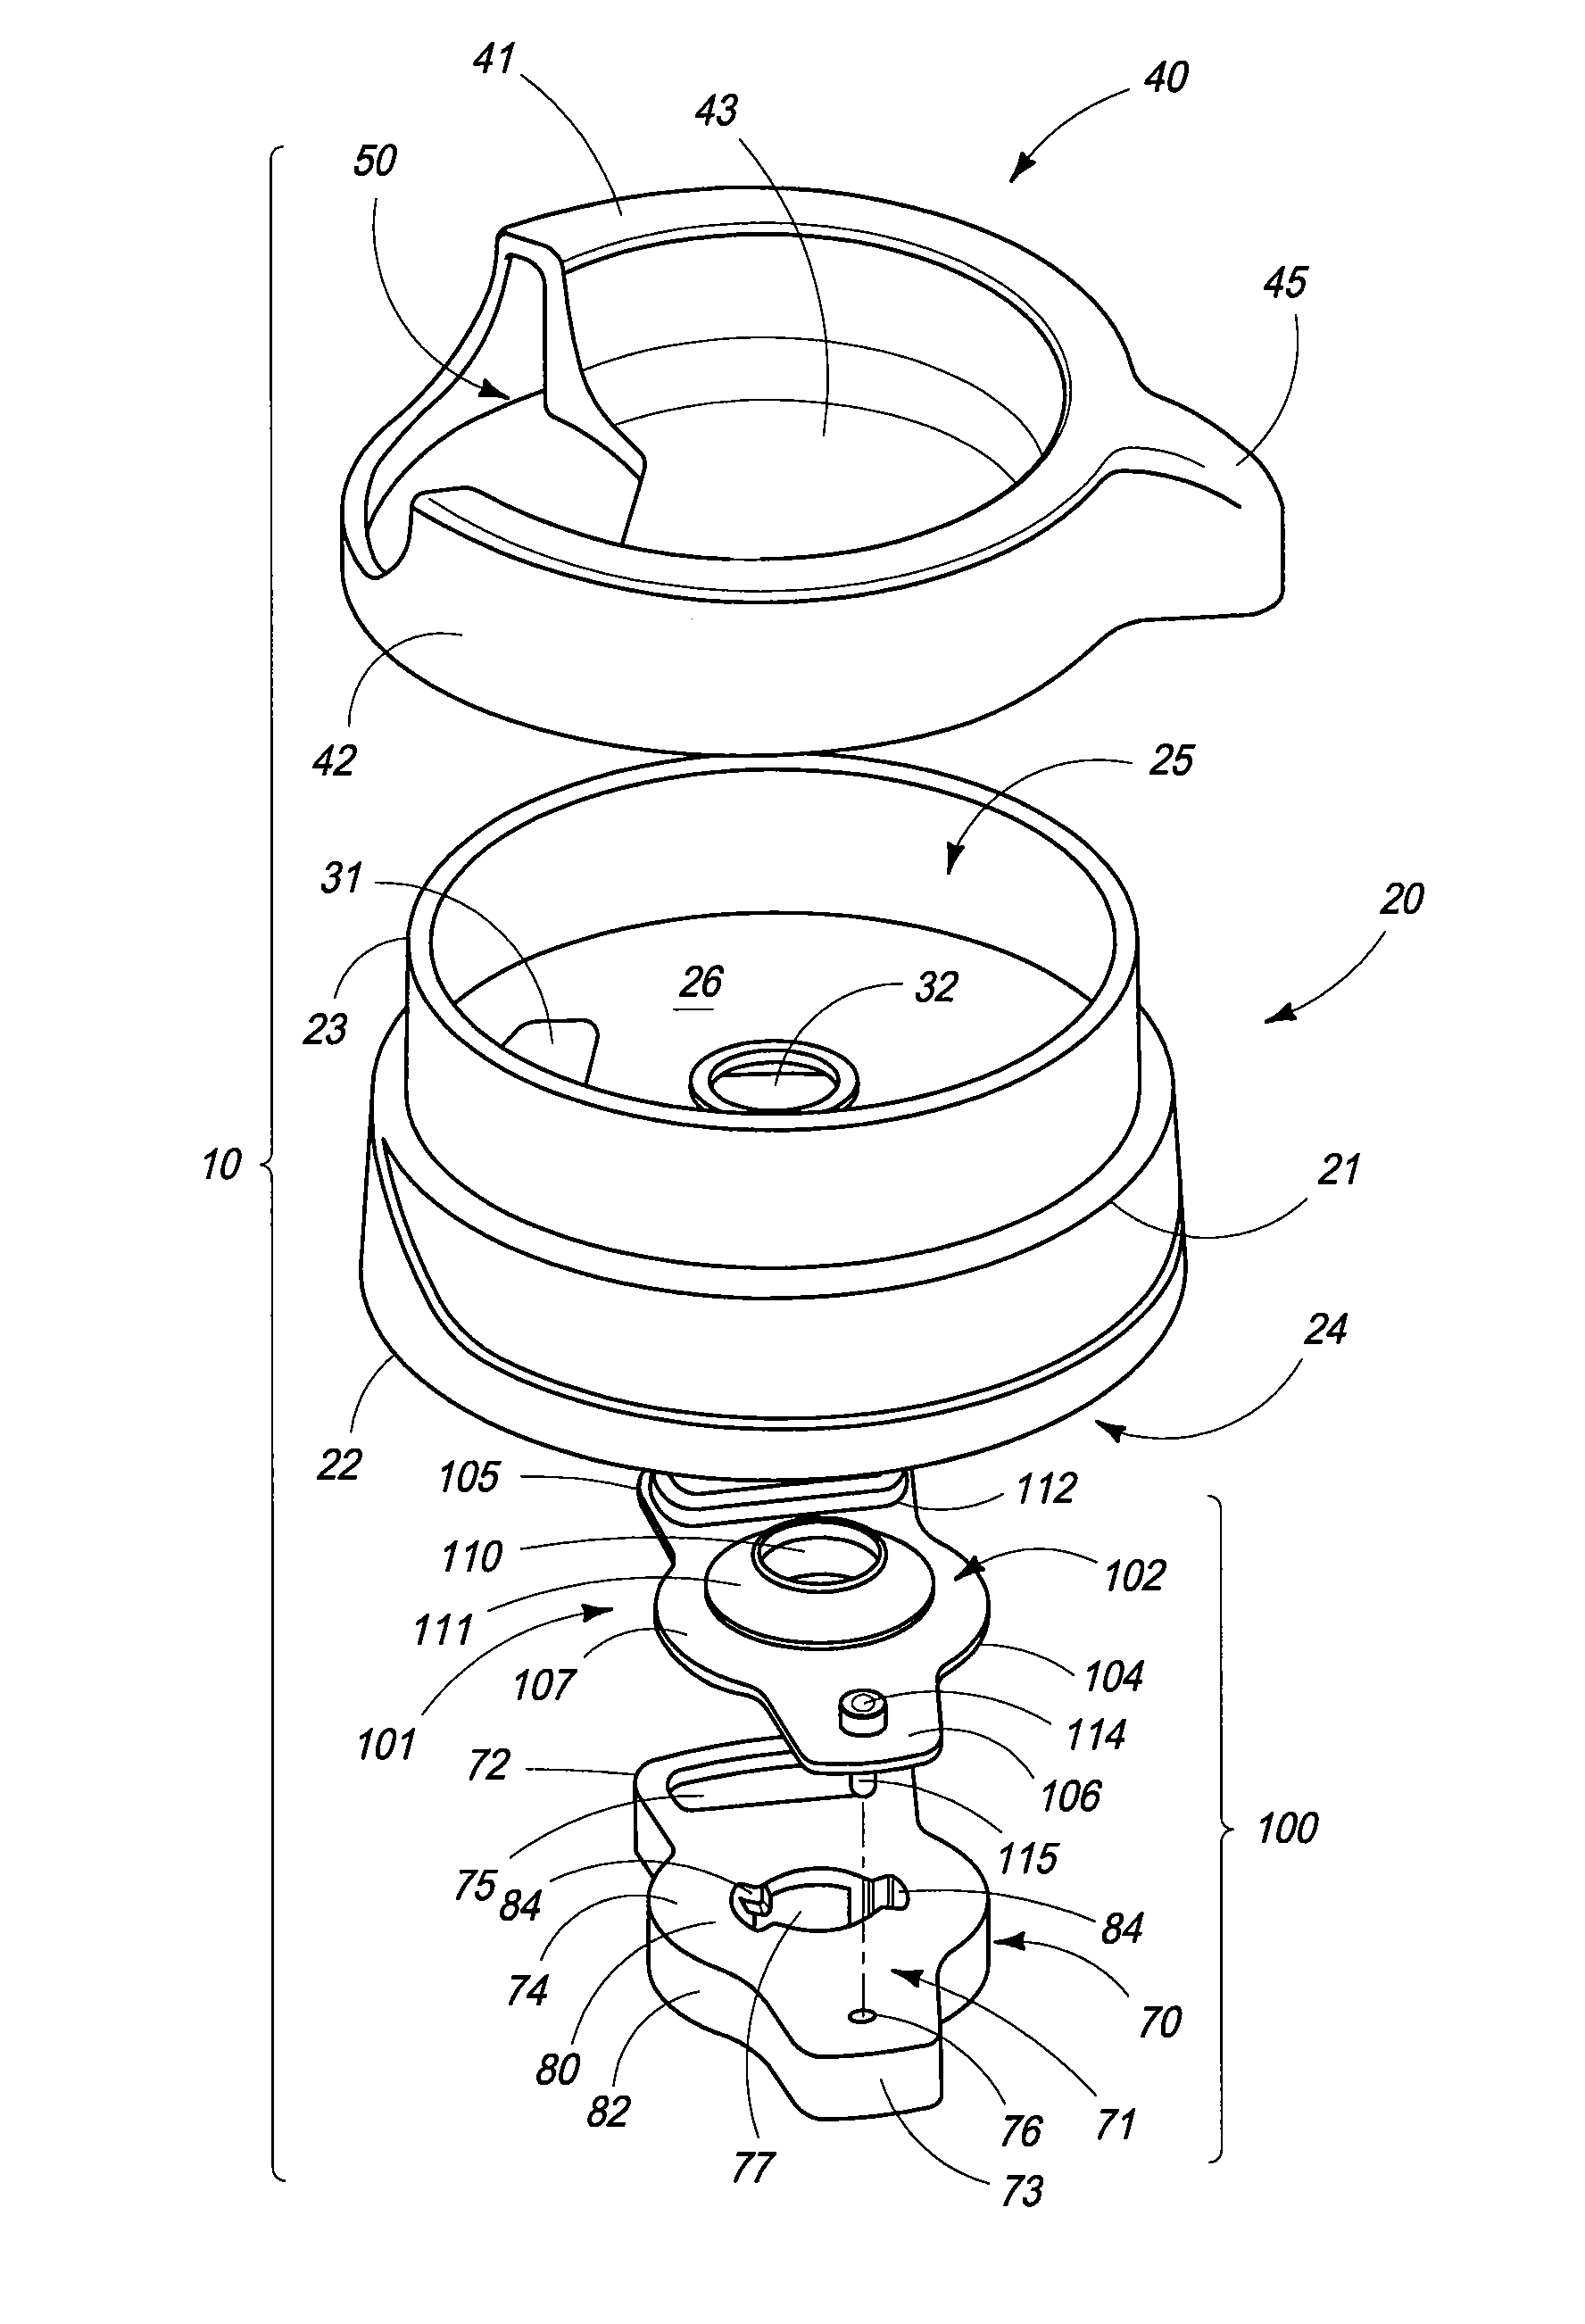 Flow control valve for dispensing a source of fluid